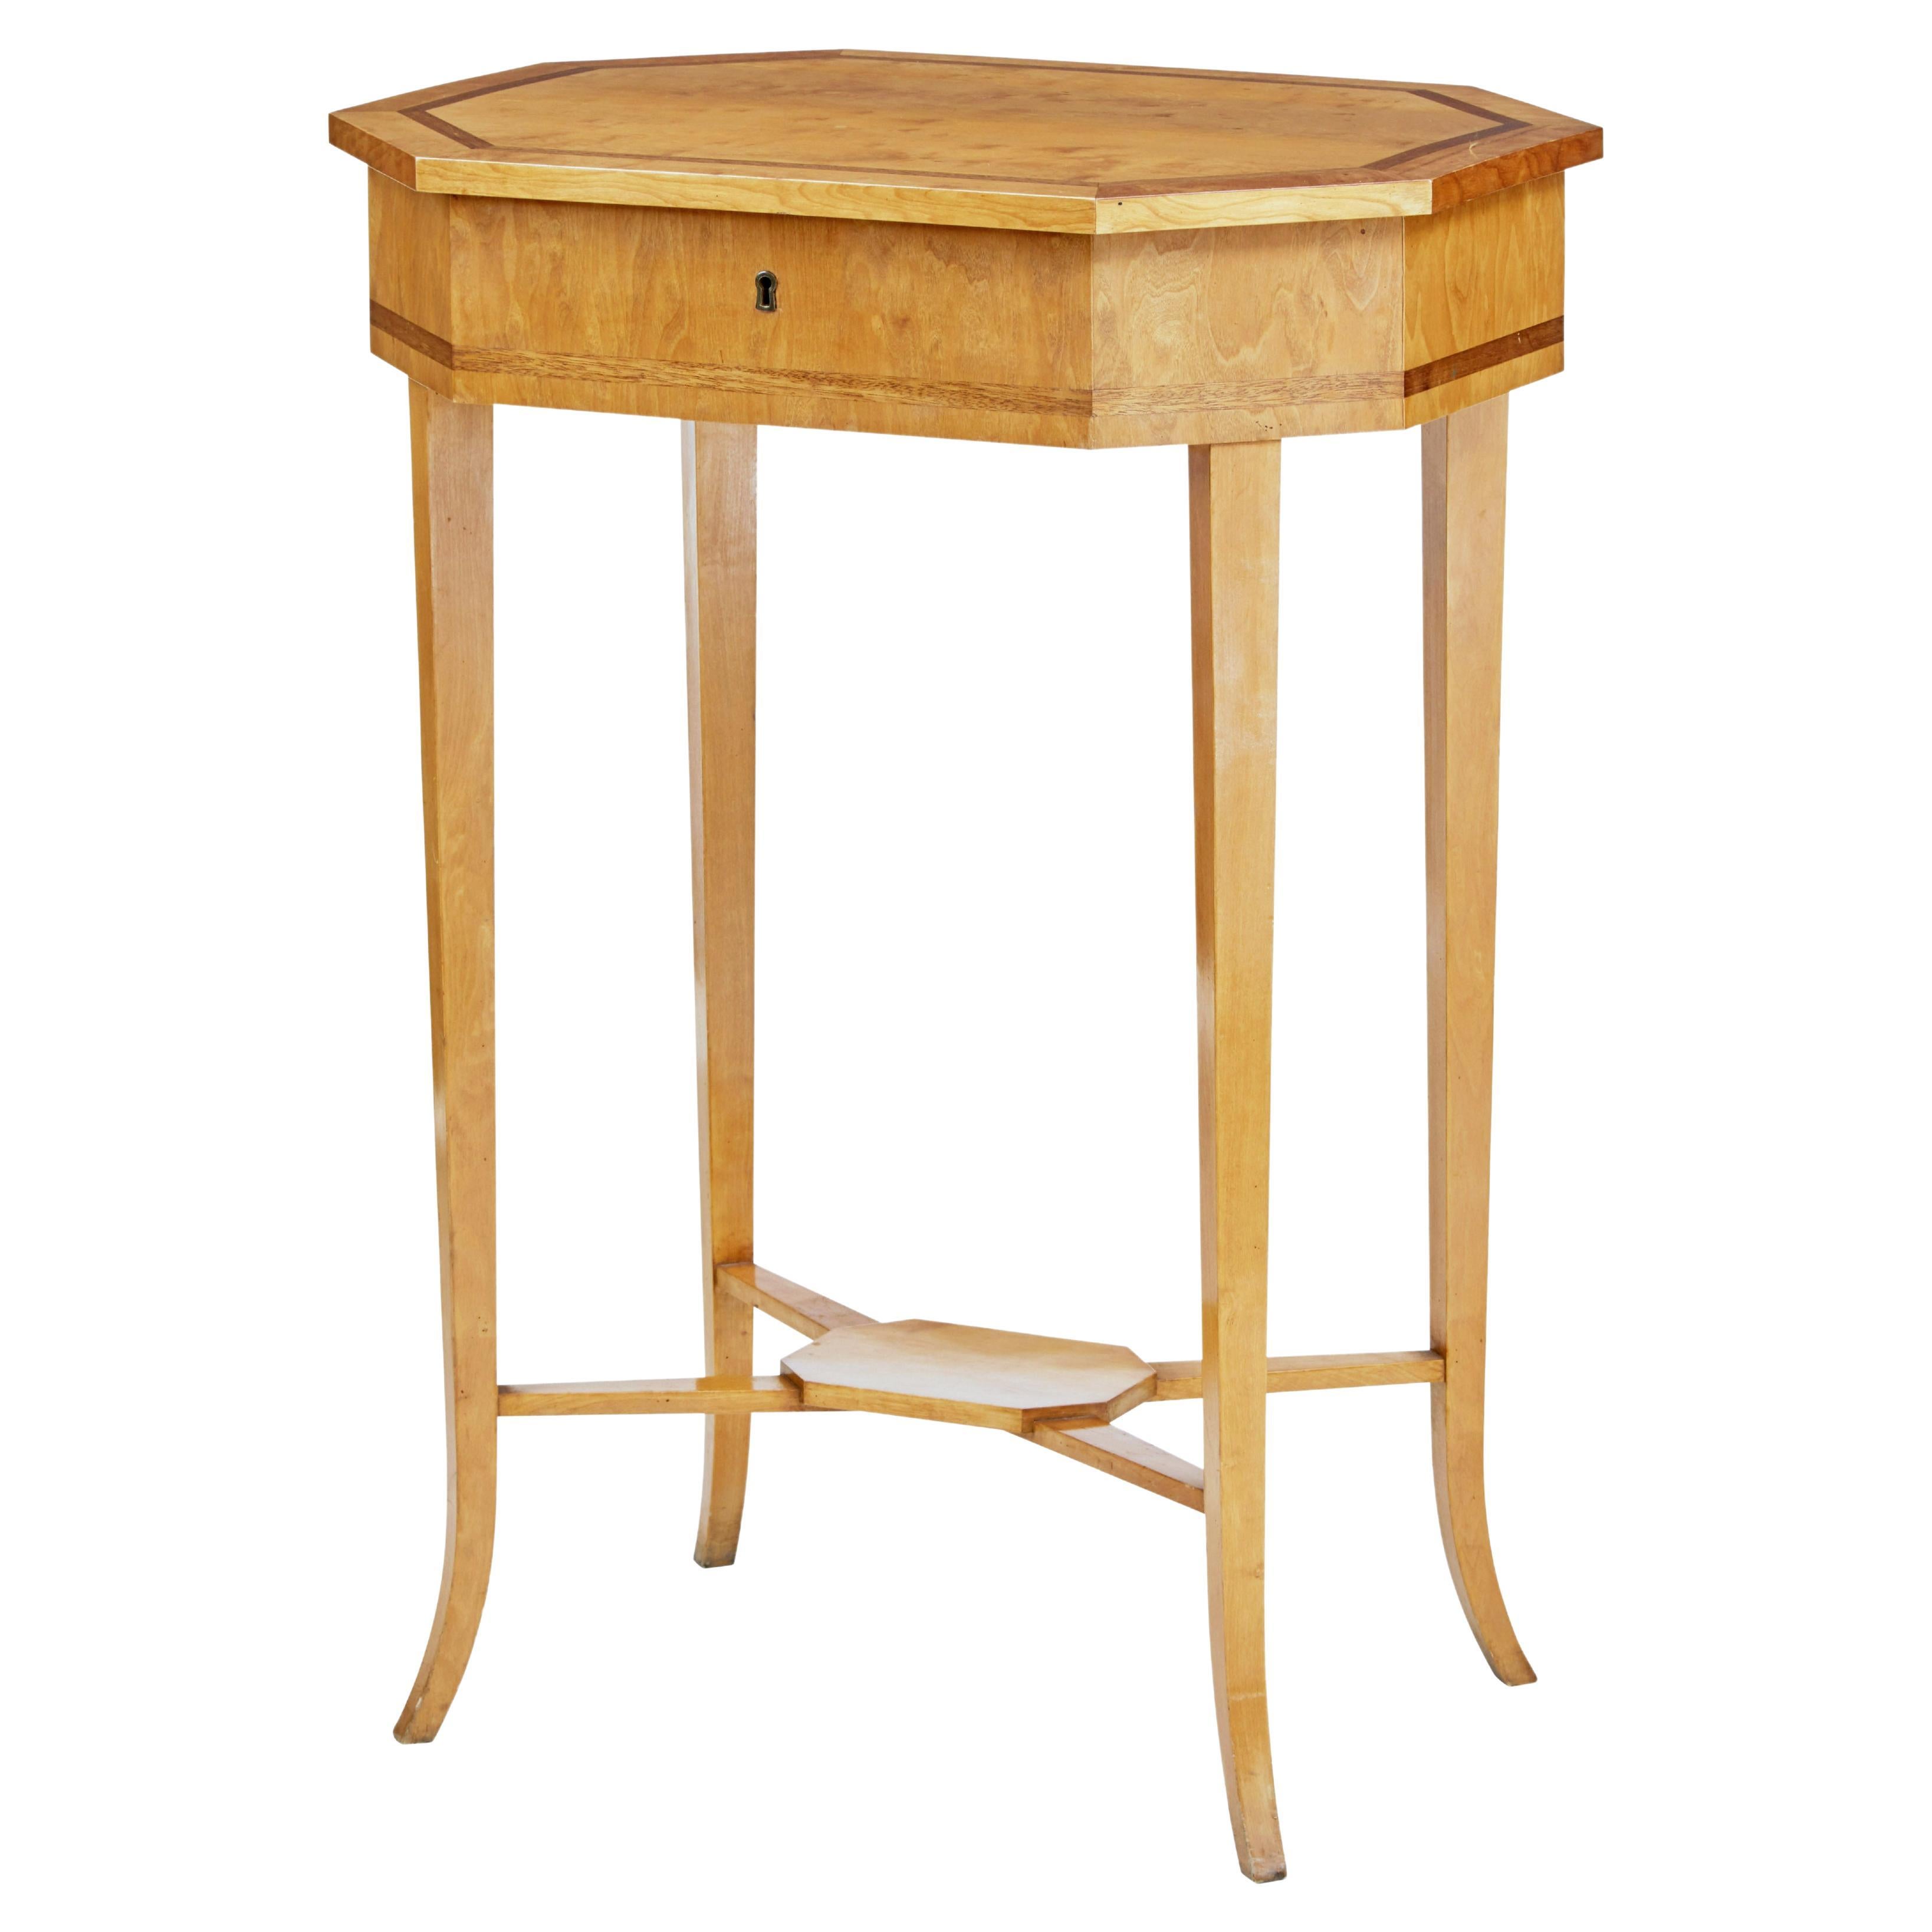 English Turn of the Century 1900s Octagonal Top Birchwood Work Table For Sale